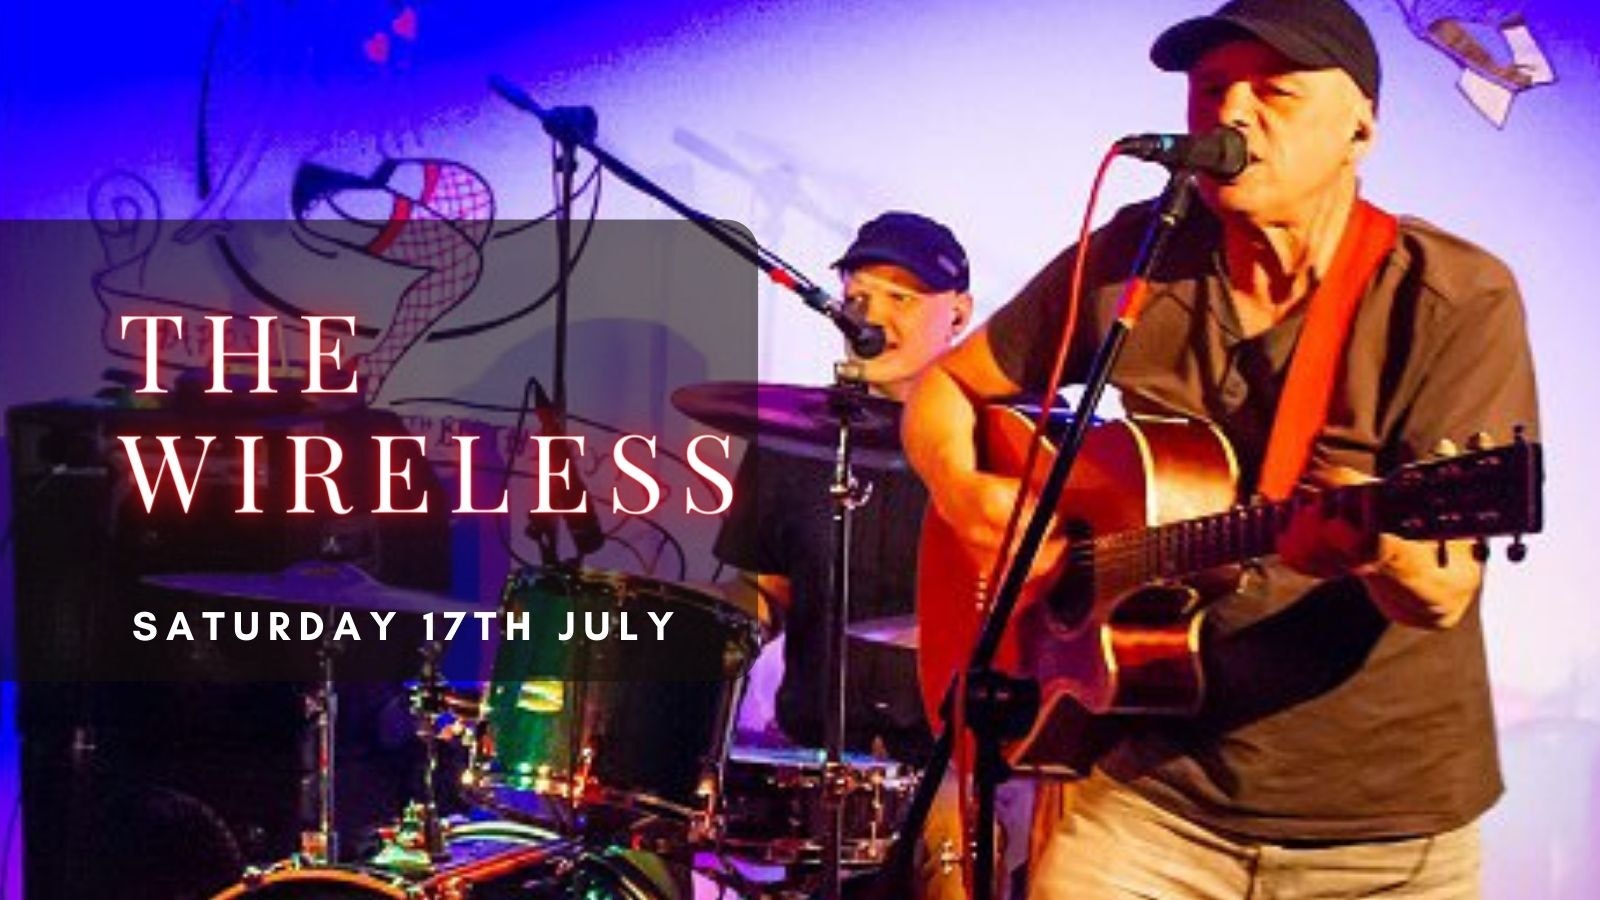 THE WIRELESS | Plymouth, Annabel’s Cabaret & Discotheque